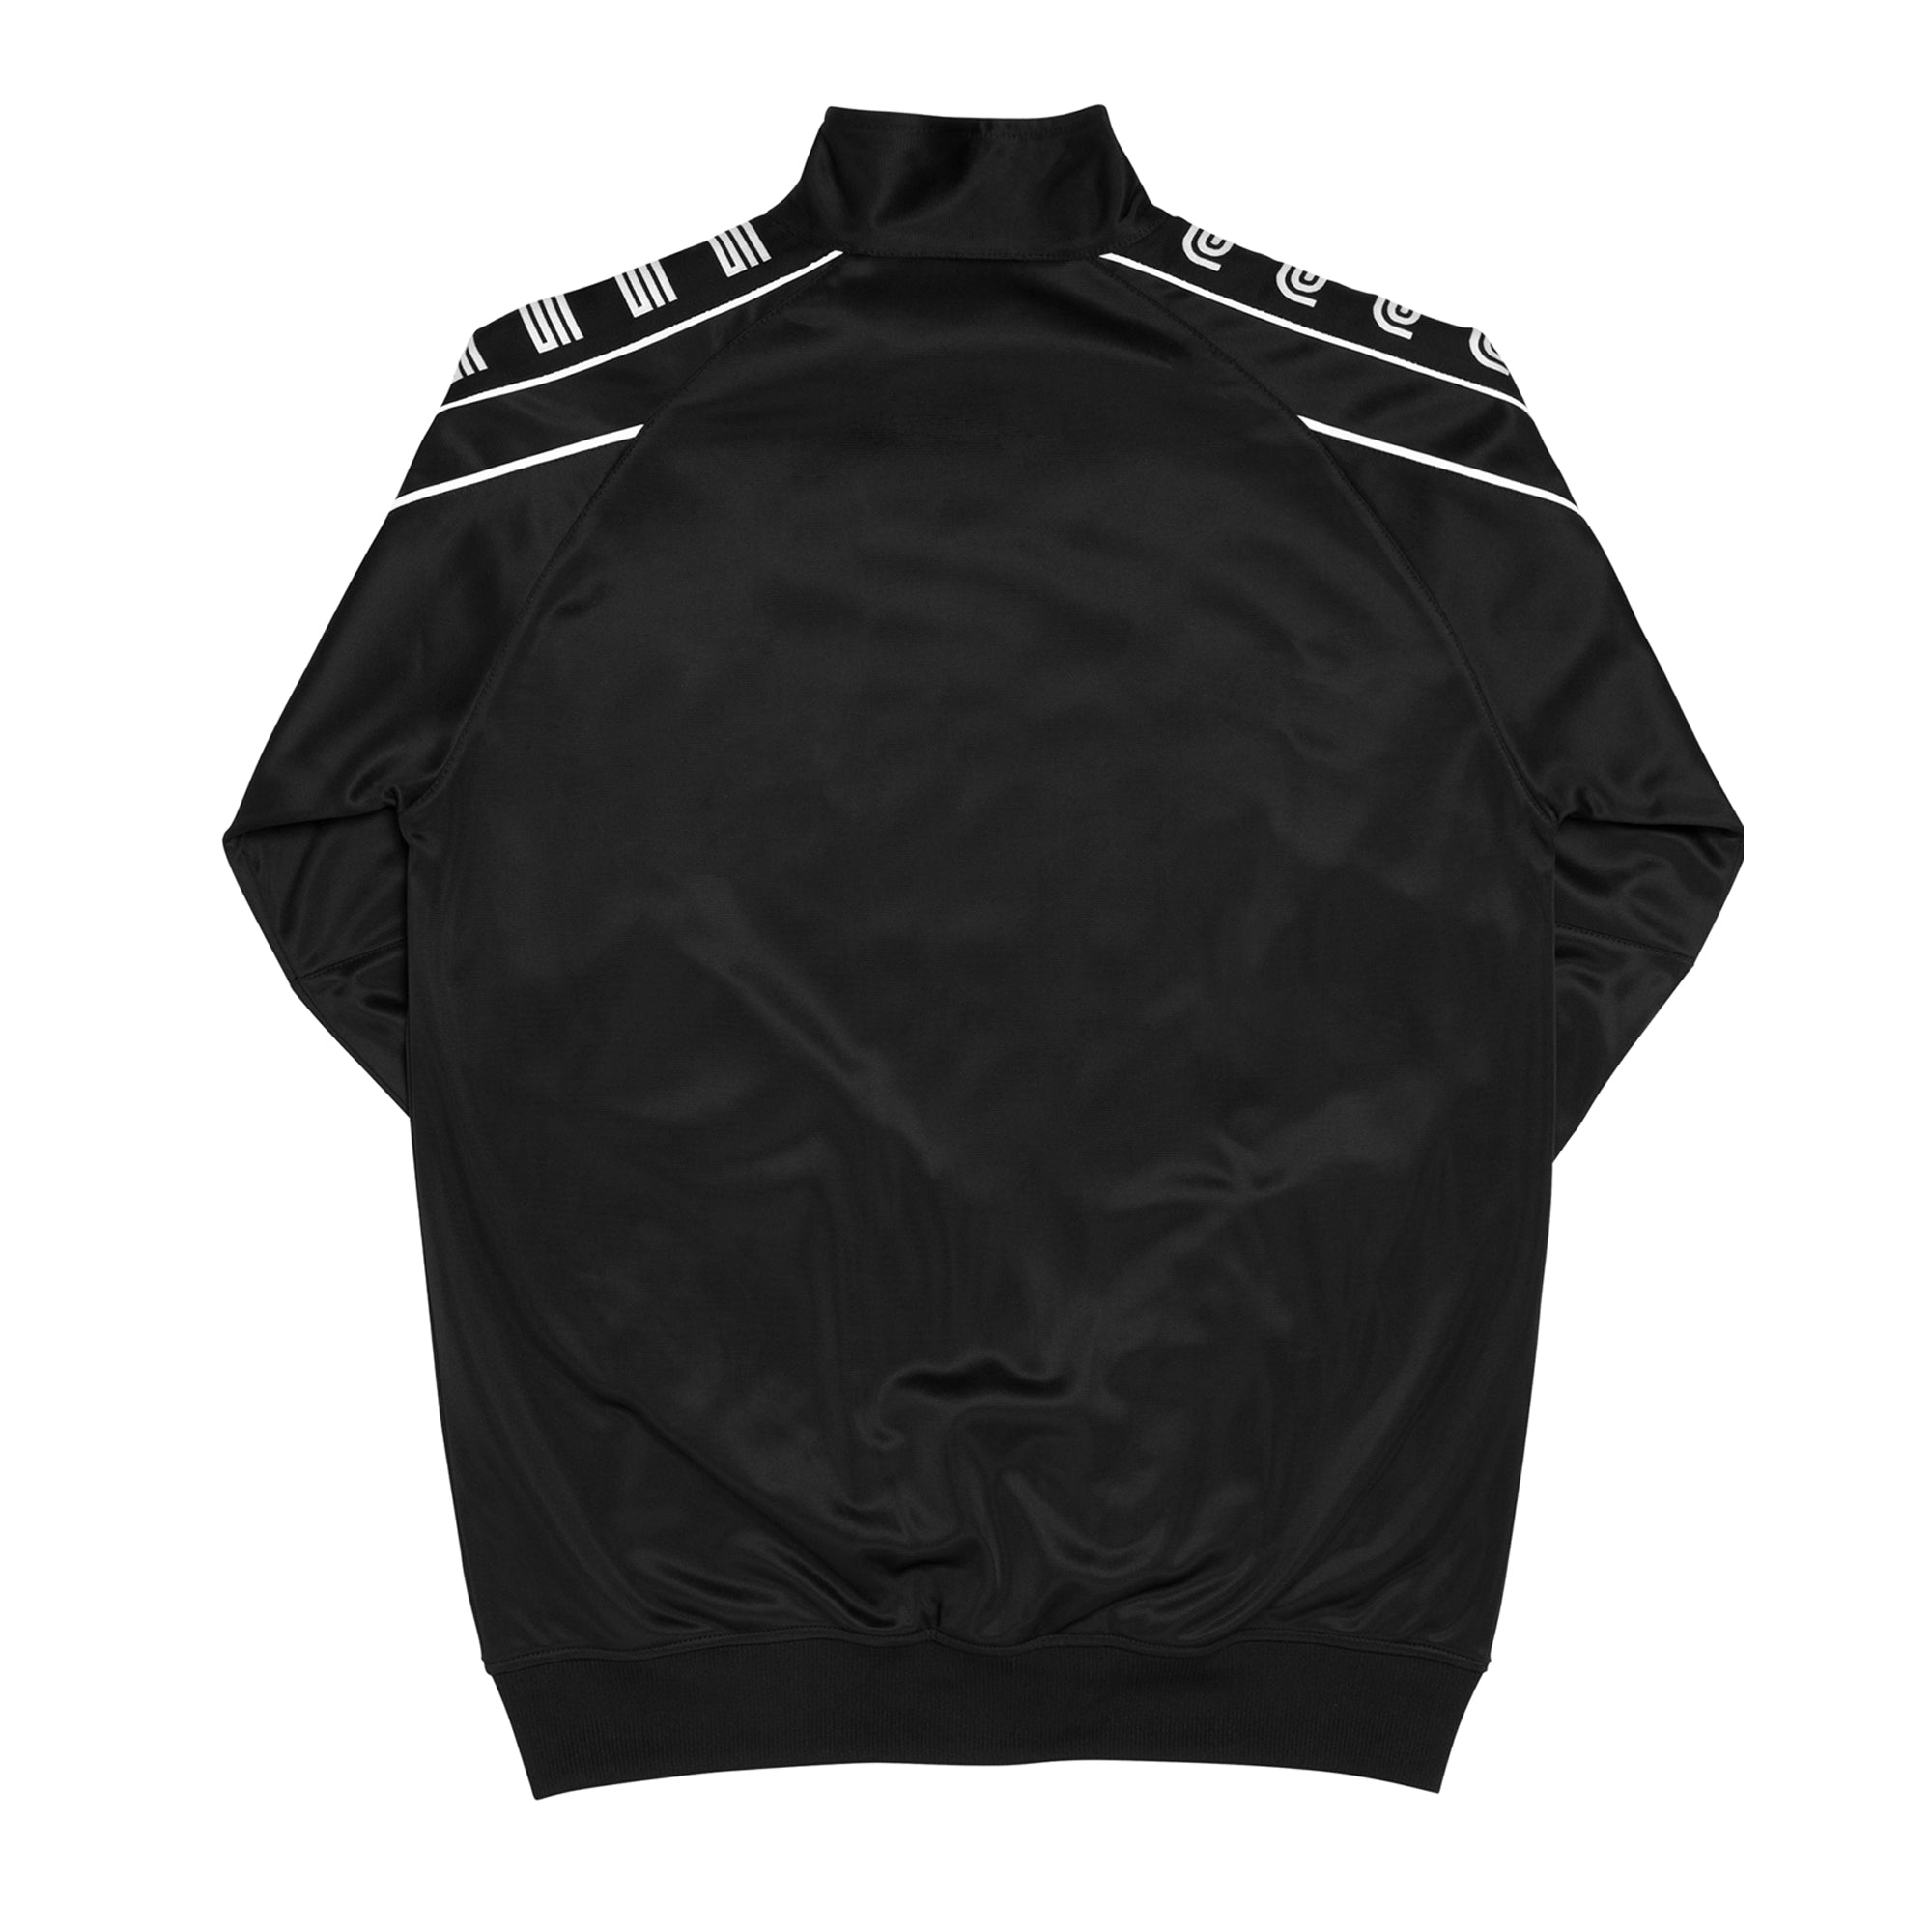 Fool’s Gold “808” Tracksuit - Jacket